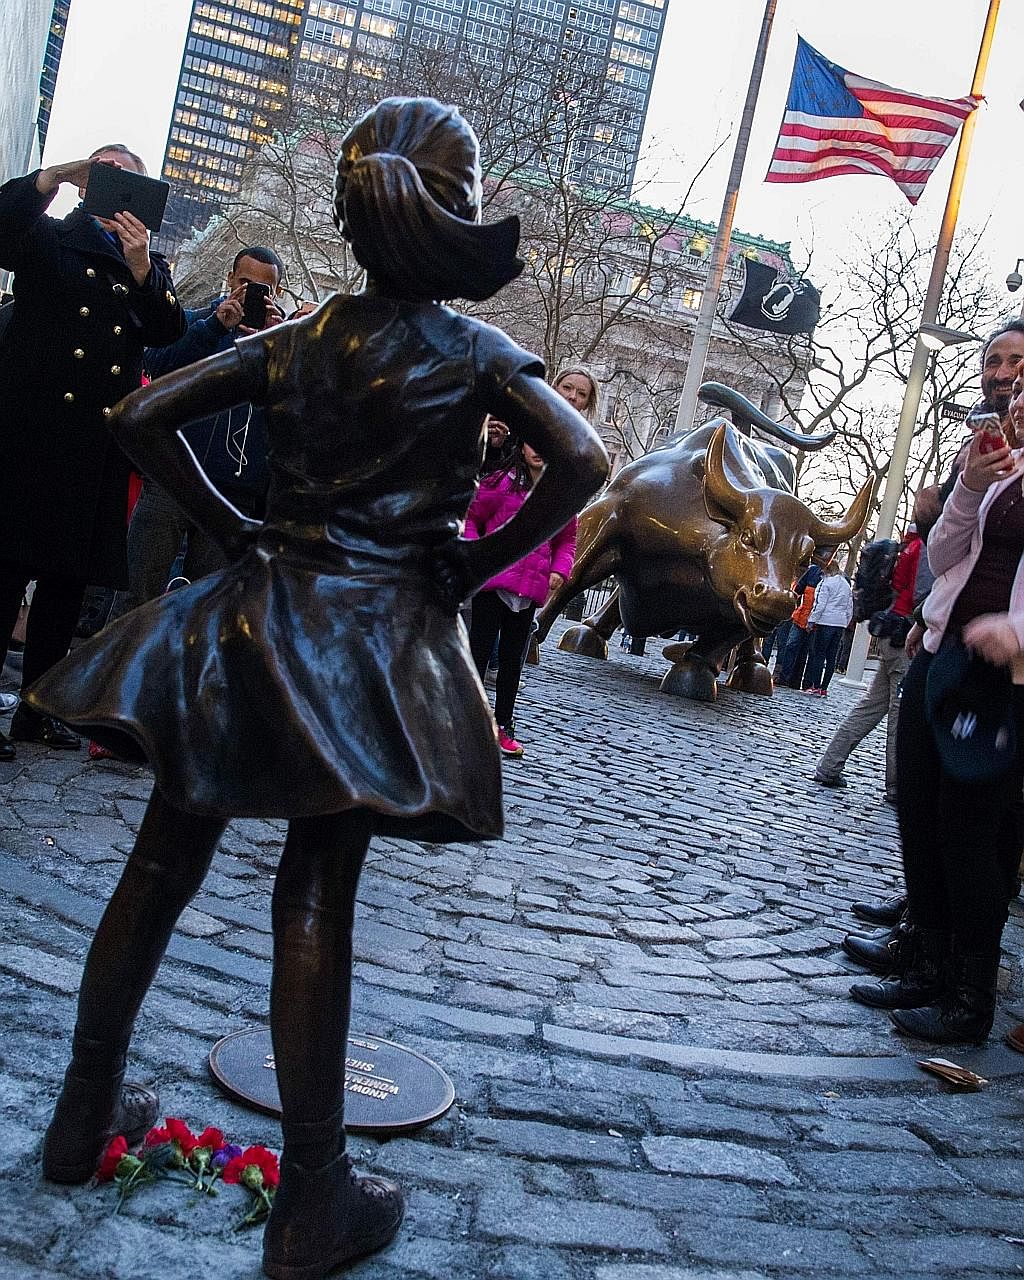 Fearless Girl, created by sculptor Kirsten Visbal, was placed at Bowling Green in honour of International Women's Day this month. She has spent the last few weeks in a face-off with Wall Street's well-known Charging Bull, and will do so until March 8